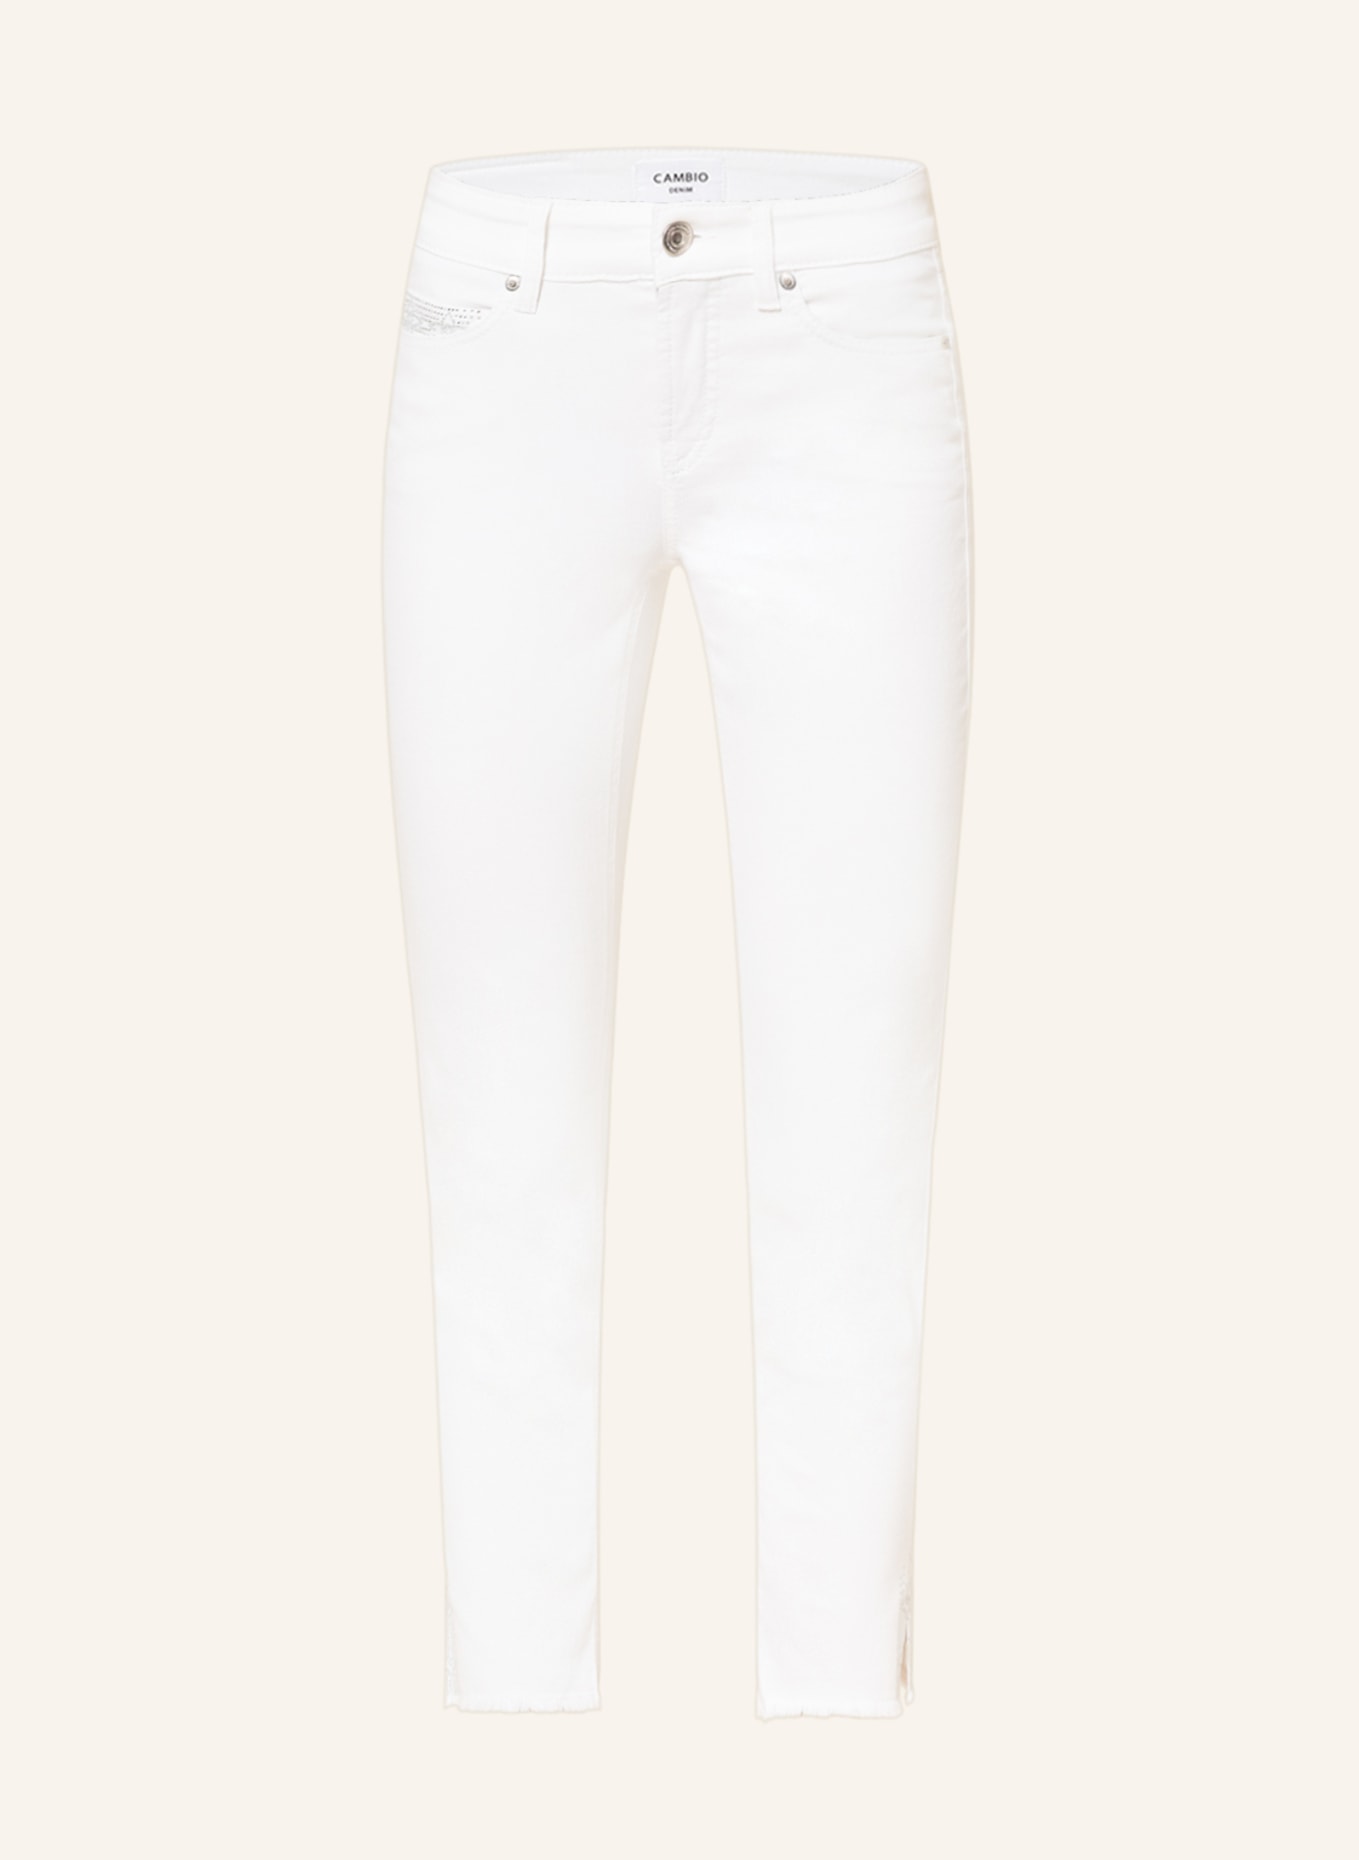 CAMBIO 7/8 jeans PIPER with decorative gems, Color: 5001 soft rinsed fringed(Image null)